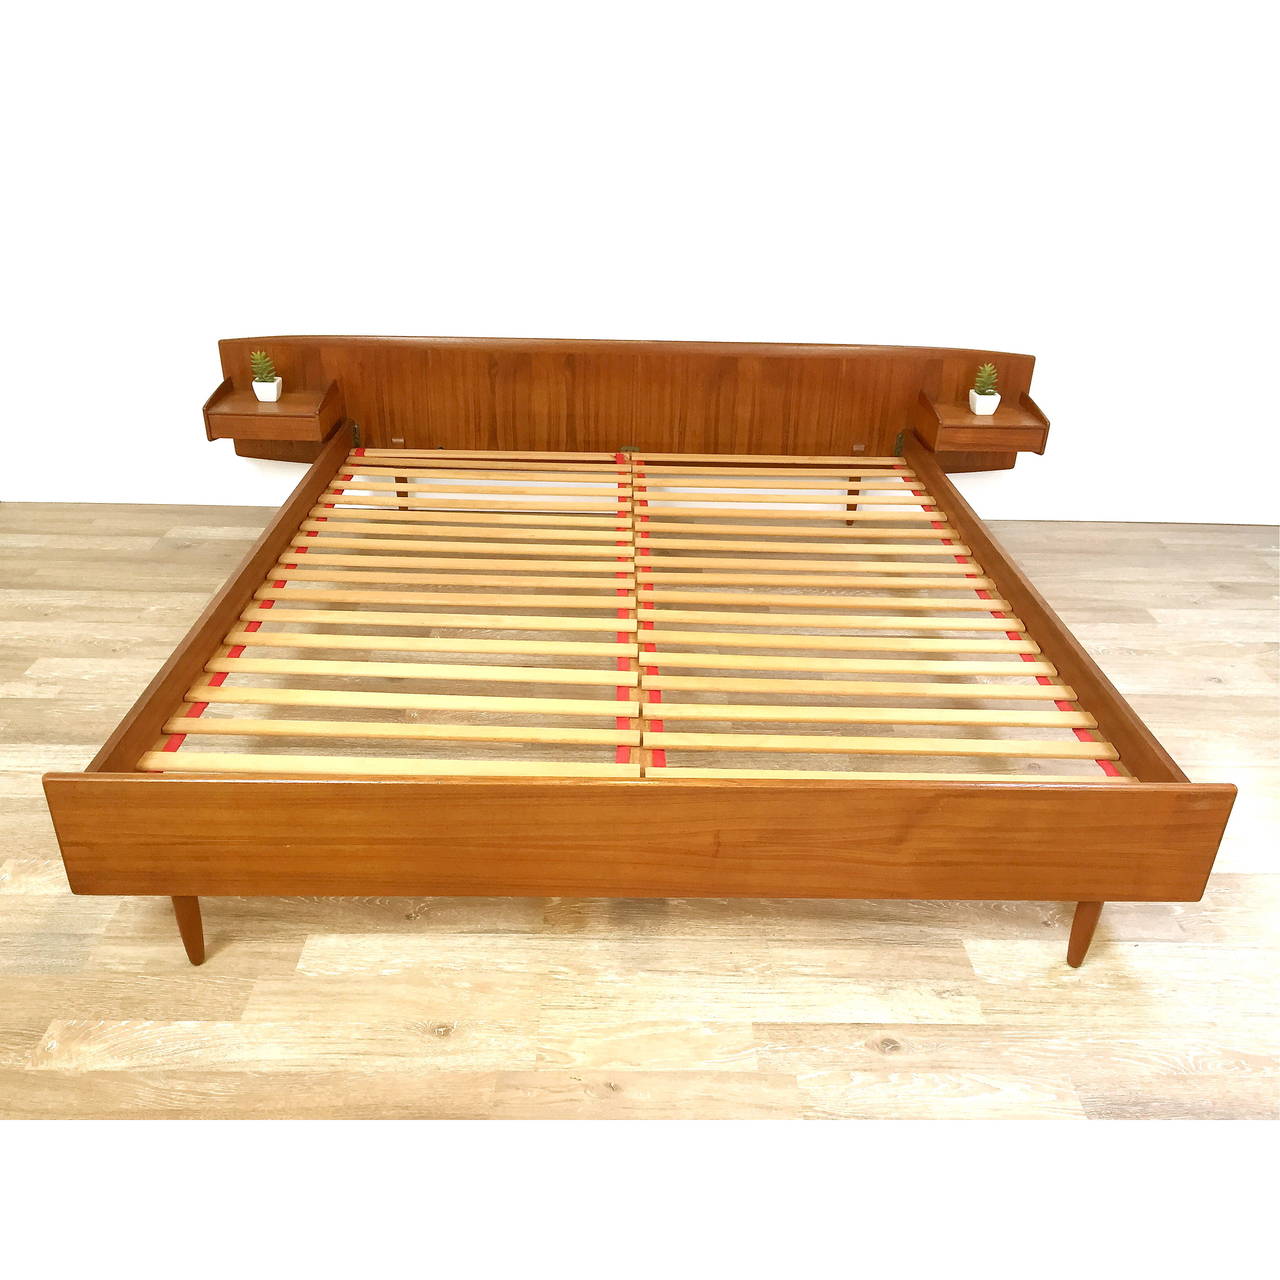 Danish modern teak California king platform bed with floating nightstands. Very nice original condition. Minor scratch and mark near right nightstand (picture eight). Marked with Danish Furniture Control Tags as shown.